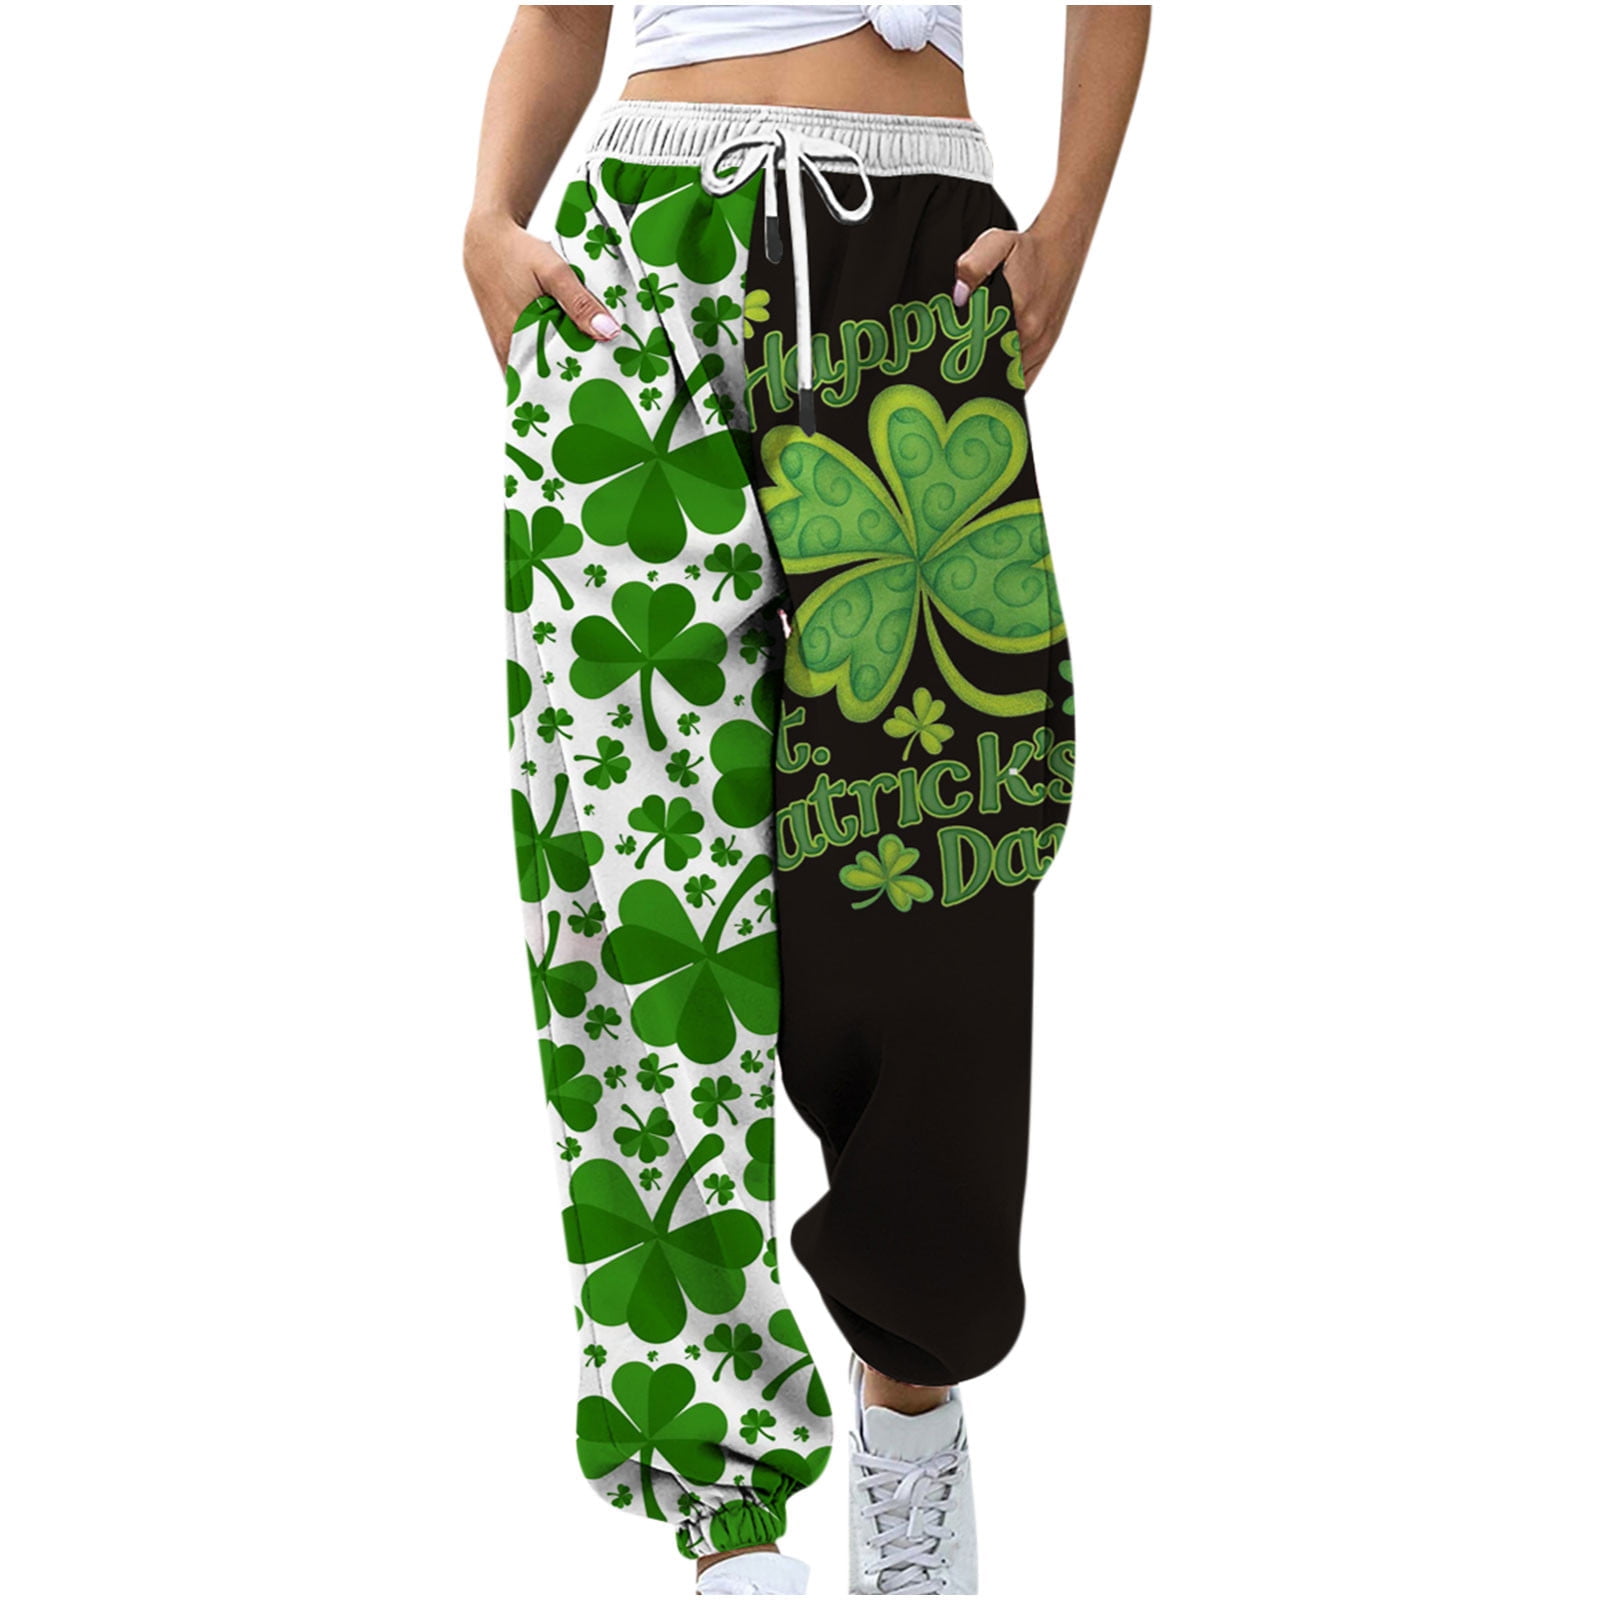 HTNBO St. Patrick's Day Sweatpants for Women Casual Green Printed ...